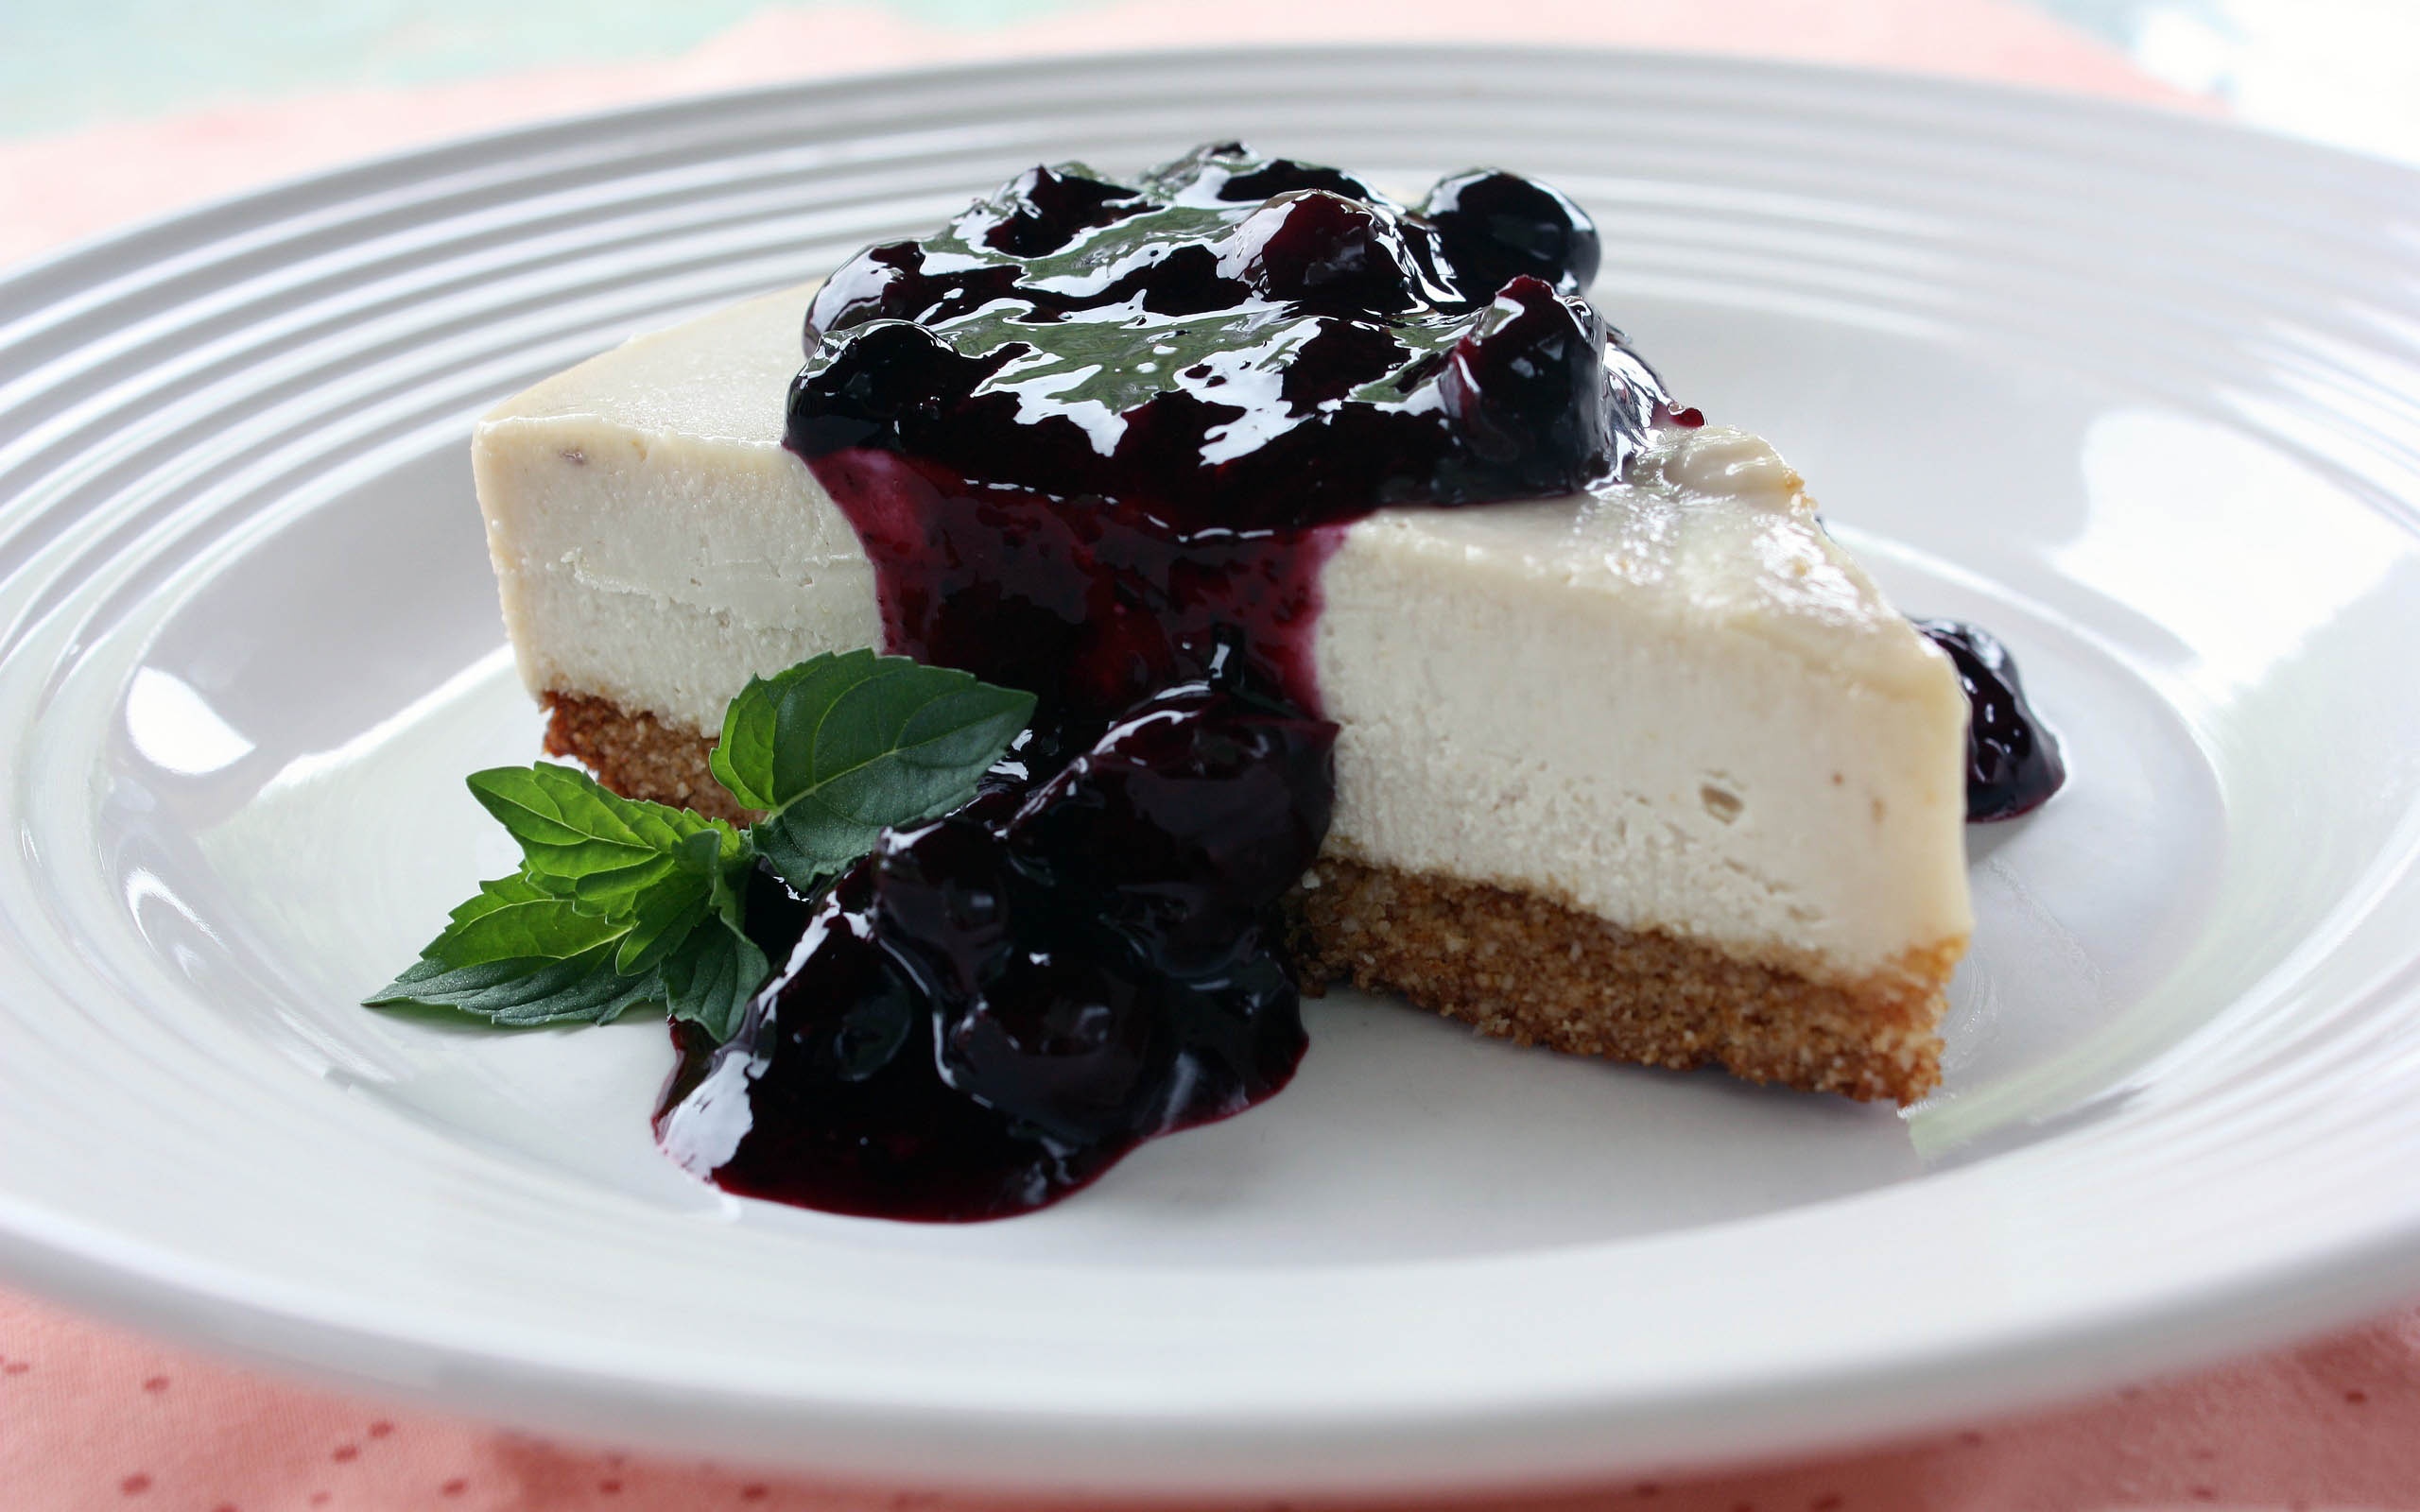 Cheese Cake With Blueberry Sauce